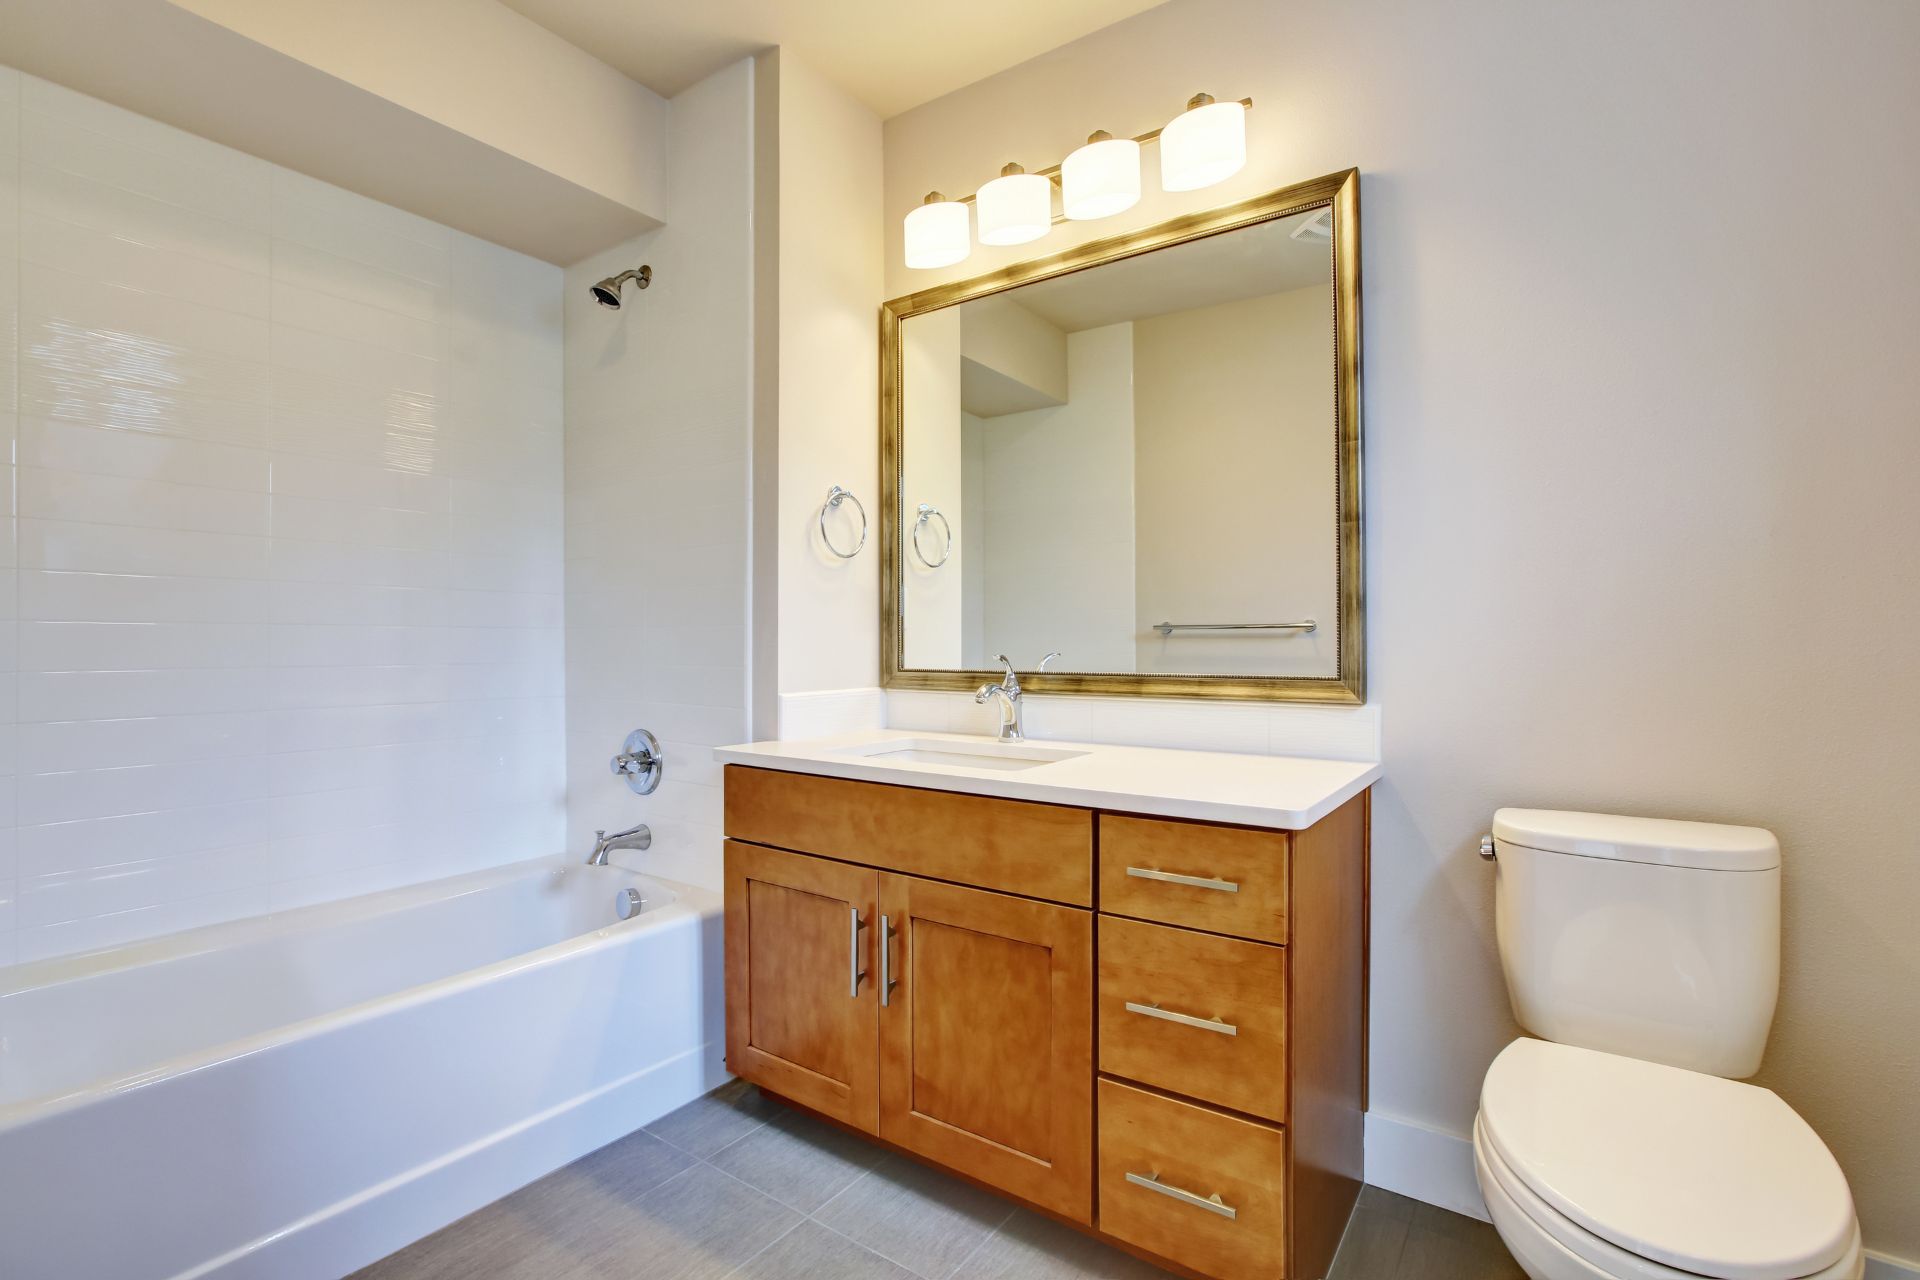 White bathroom with toilet, bath tub, and a classic oak free-standing vanity